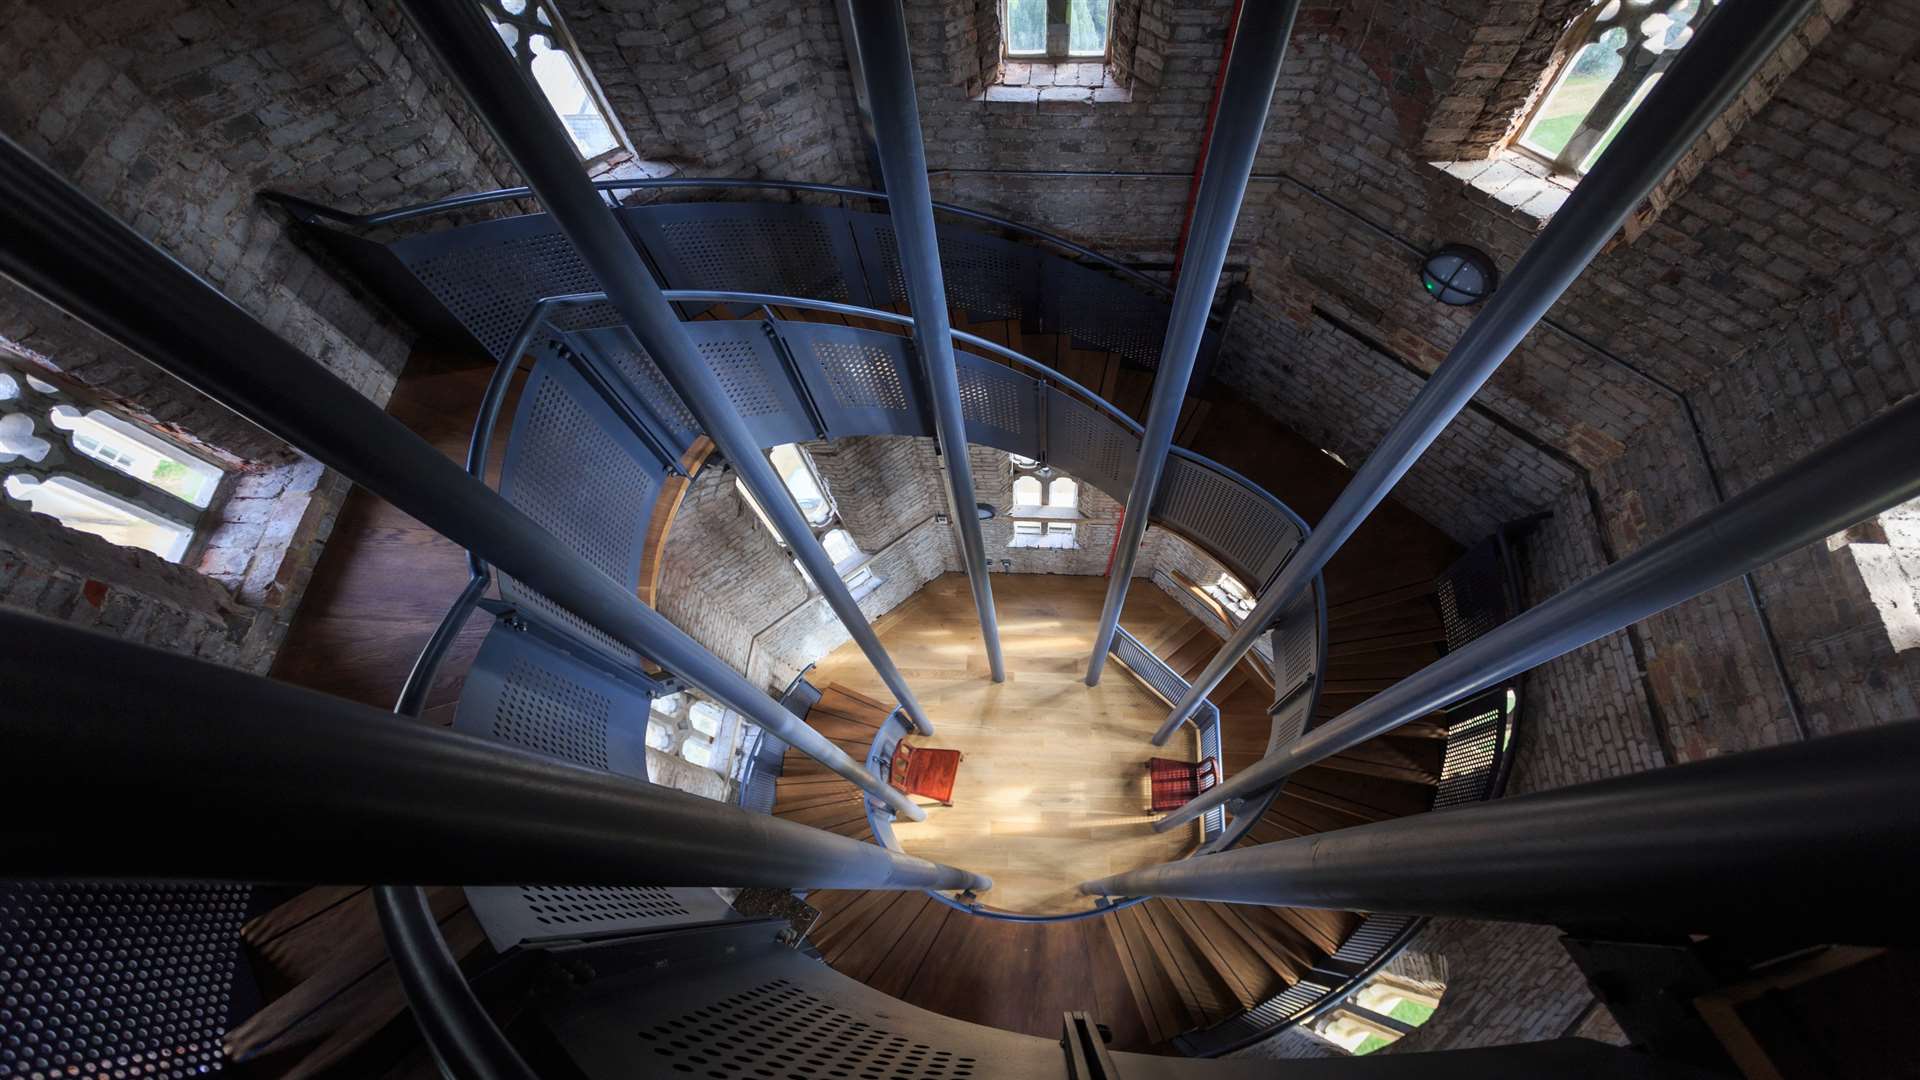 The internal steel staircase